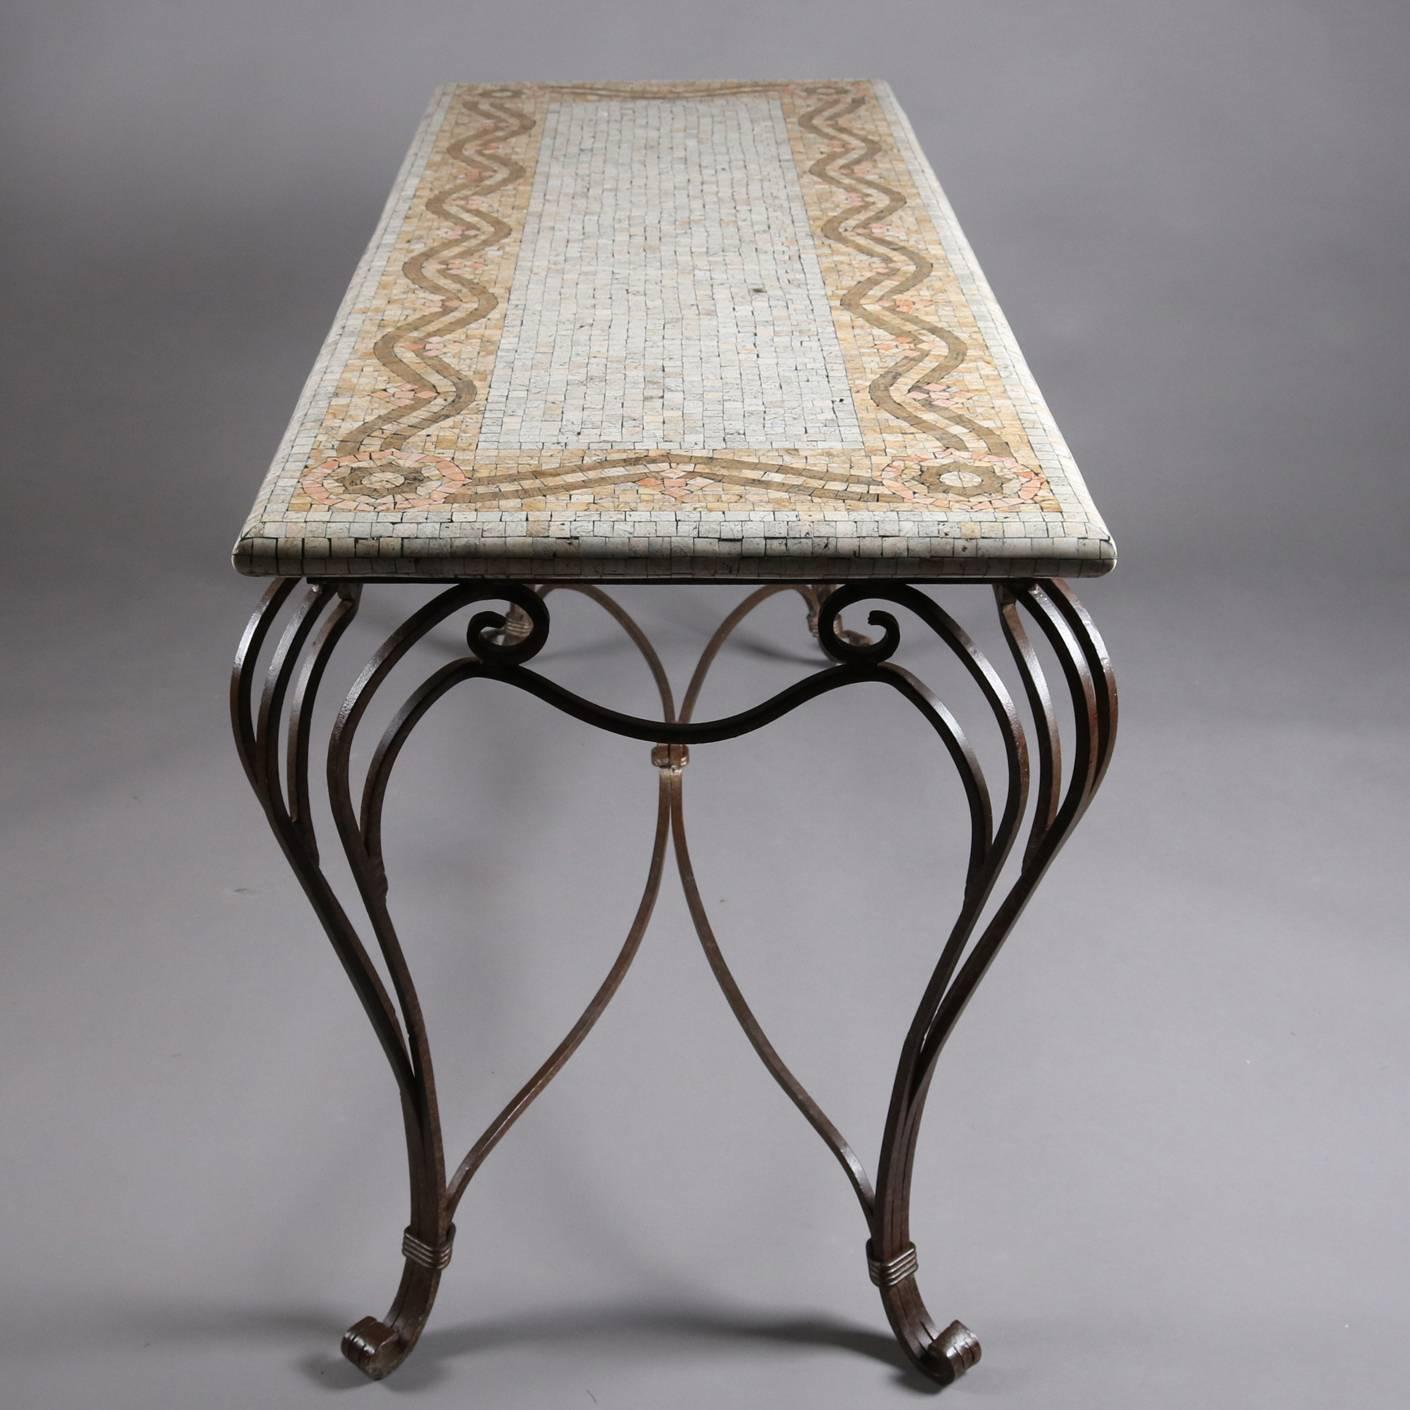 Italian Mosaic Tile Hall Table with Wrought Iron Base, 20th Century 7